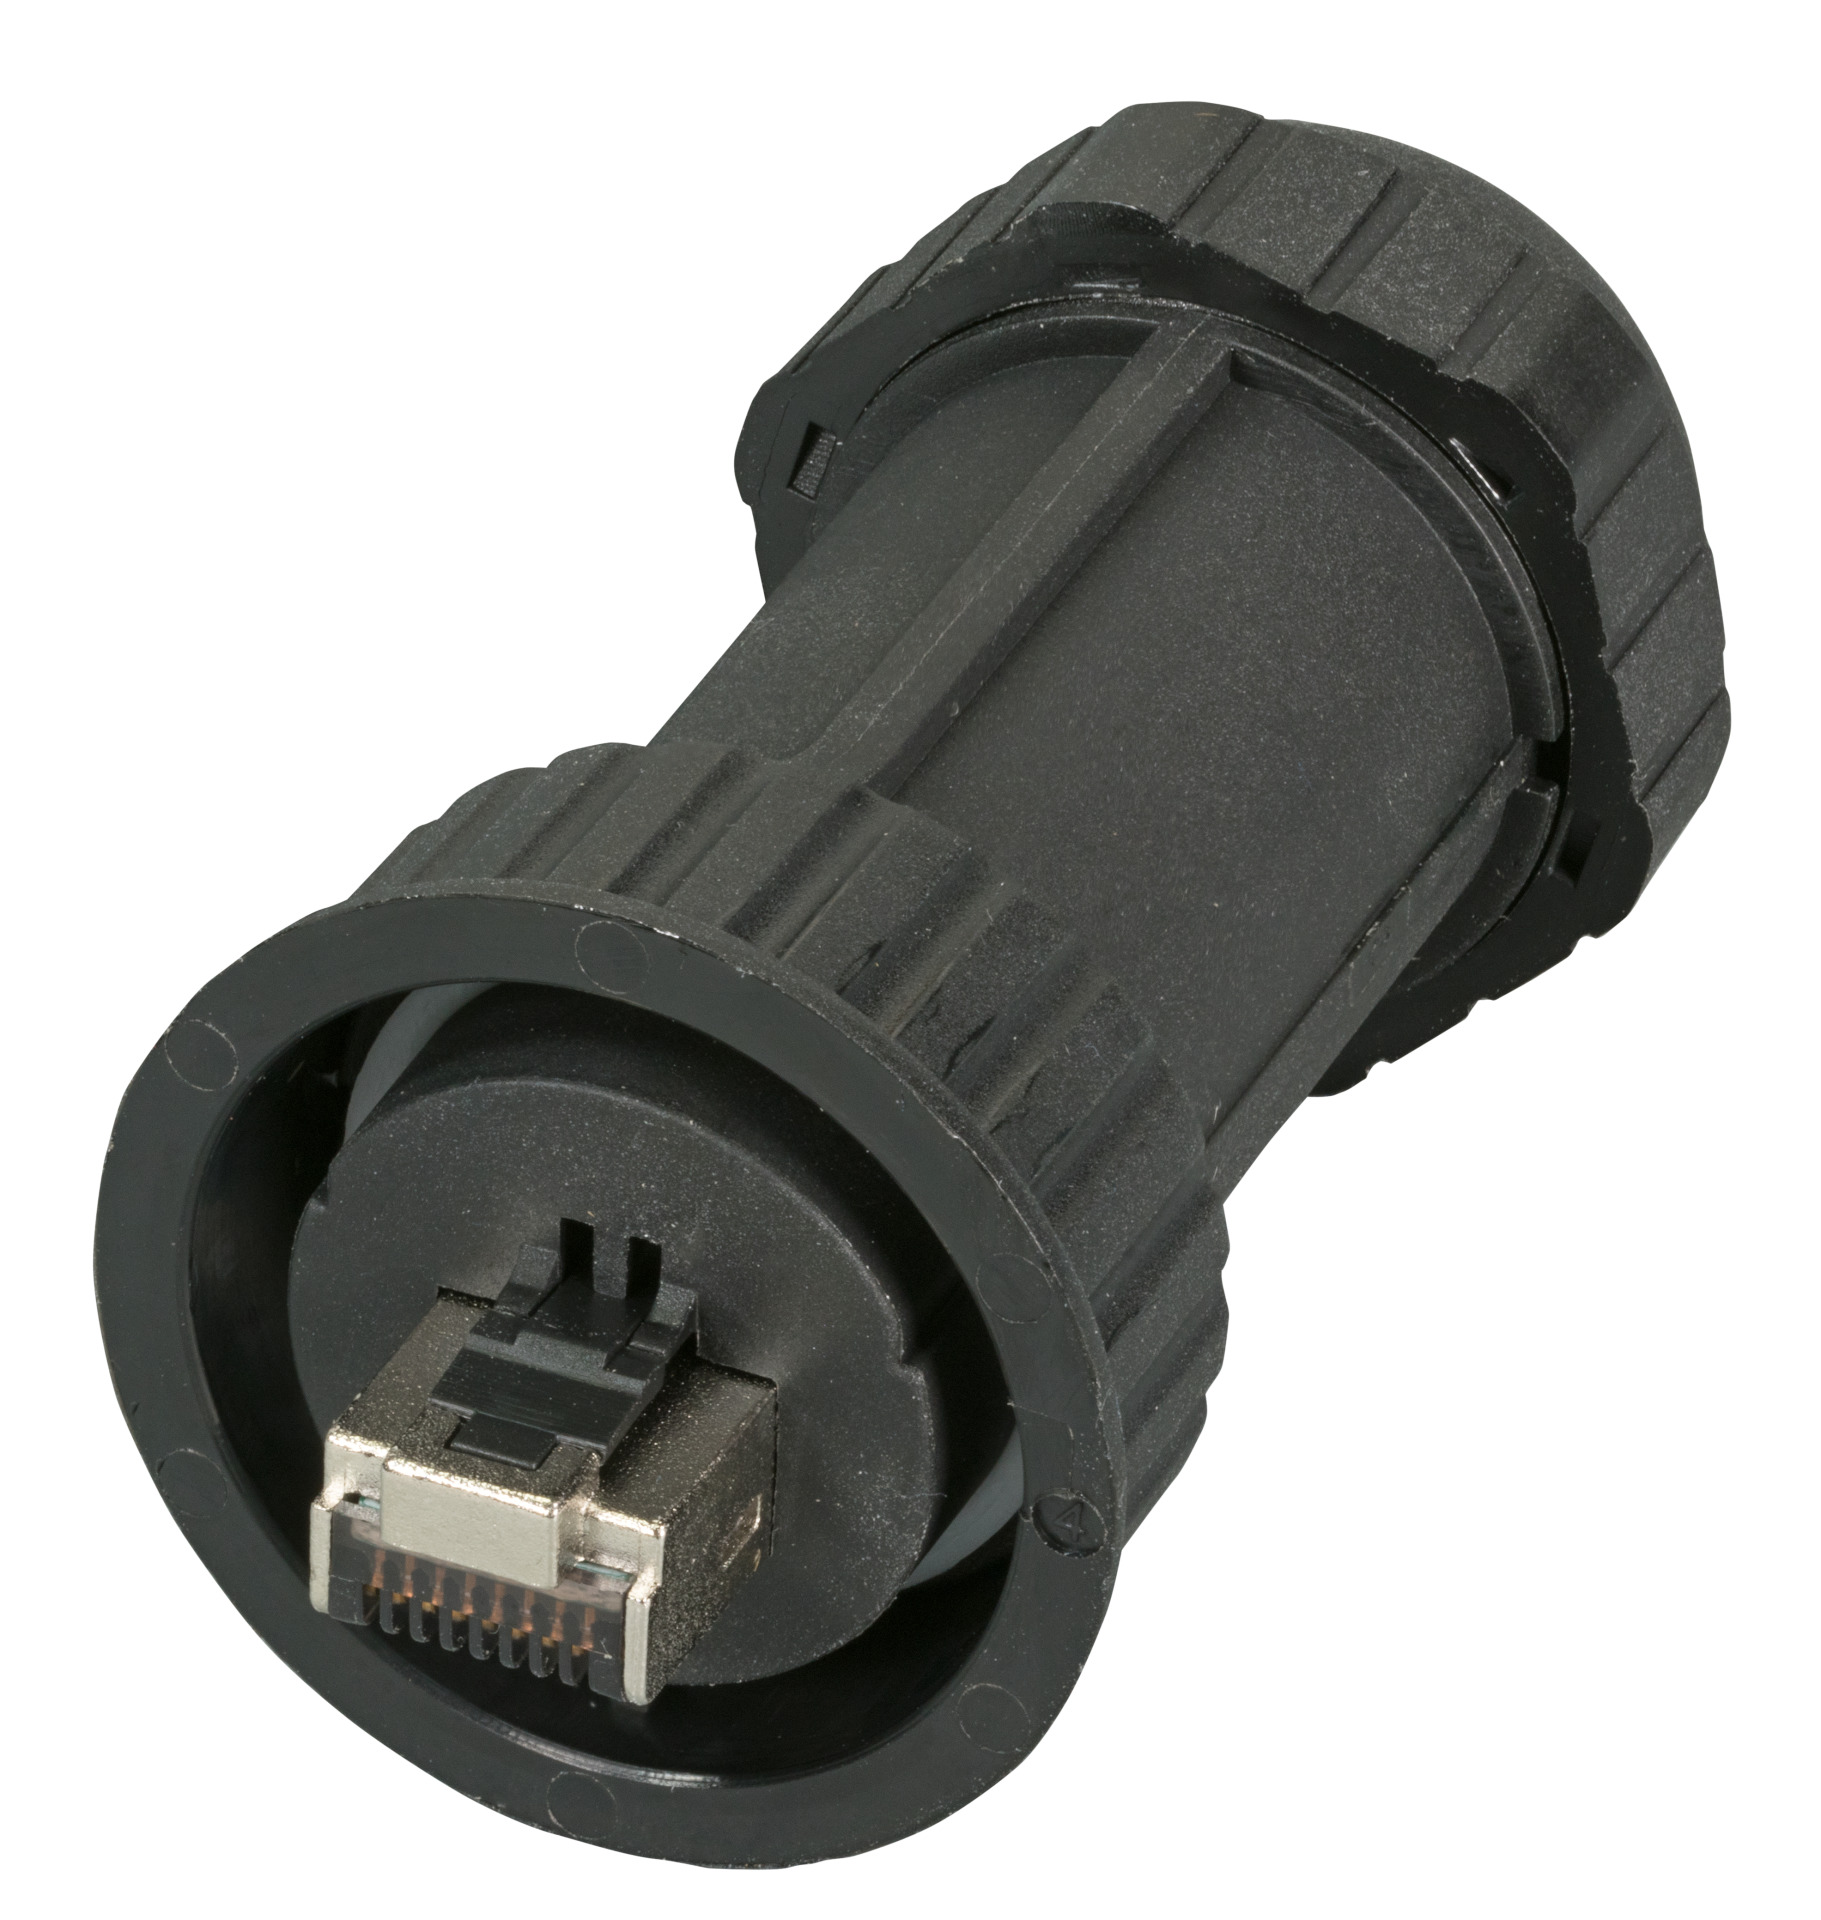 IP68 Cable gland for RJ45 field assembly plugs, sealing for 6.5-9.0mm OD